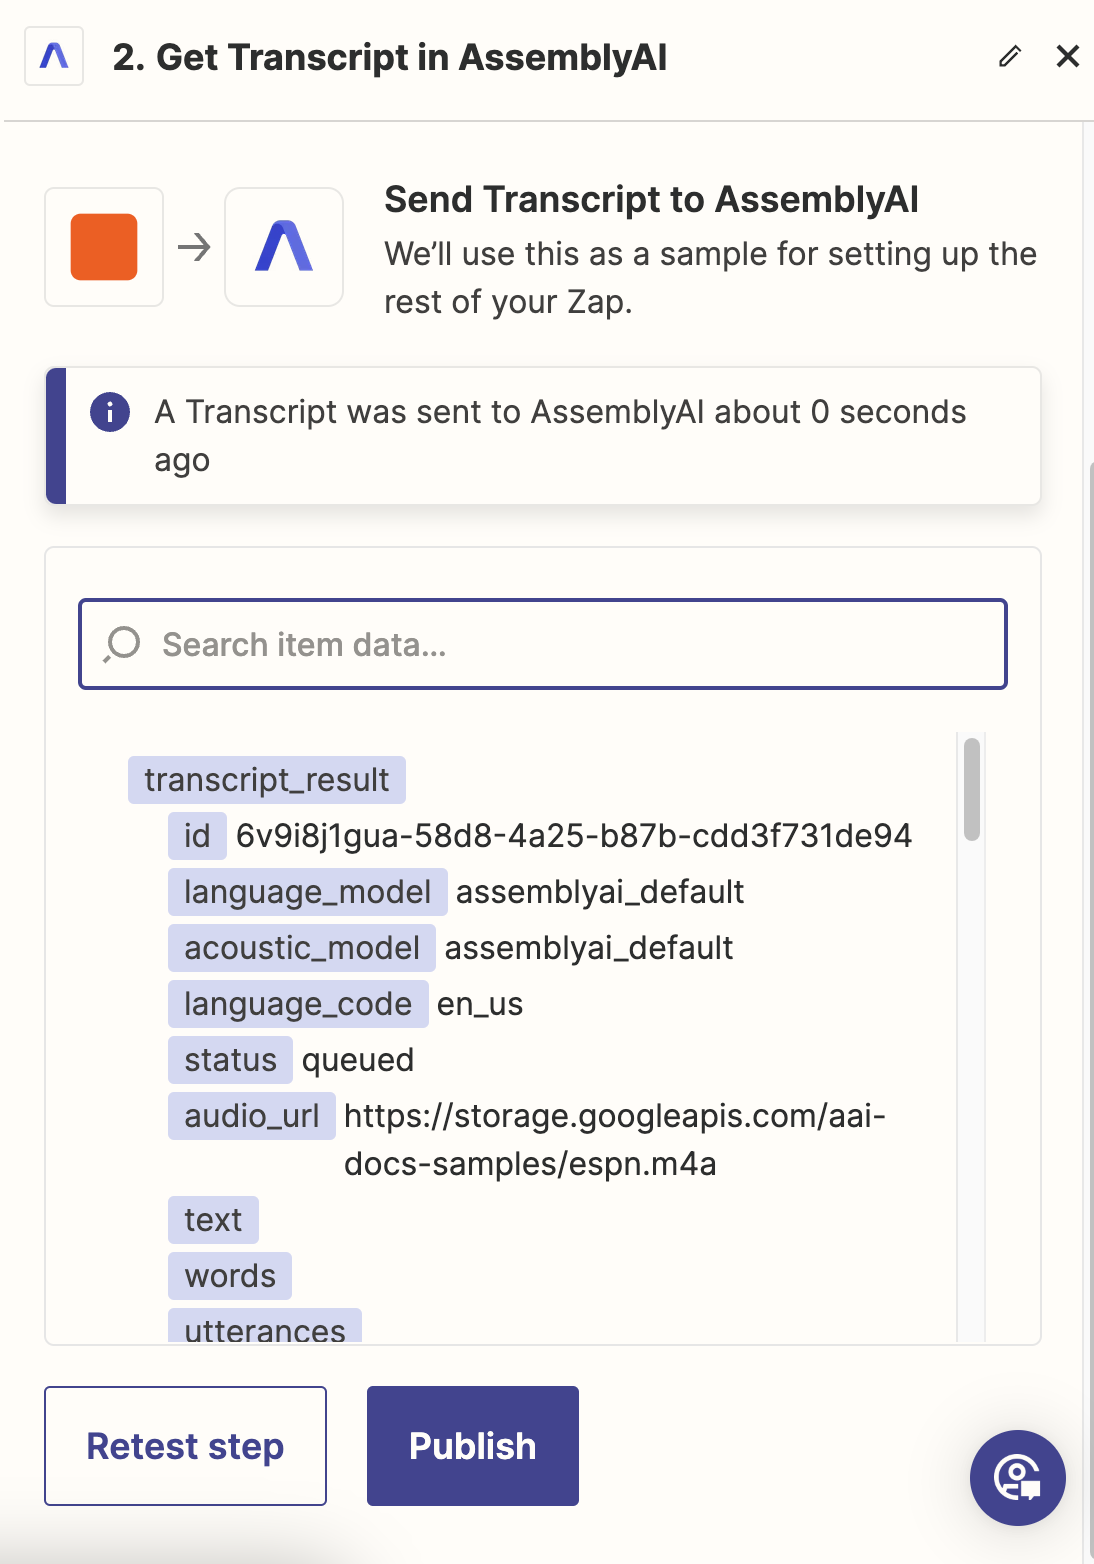 Test Zapier tab where you can see the output of the AssemblyAI Get Transcript action.